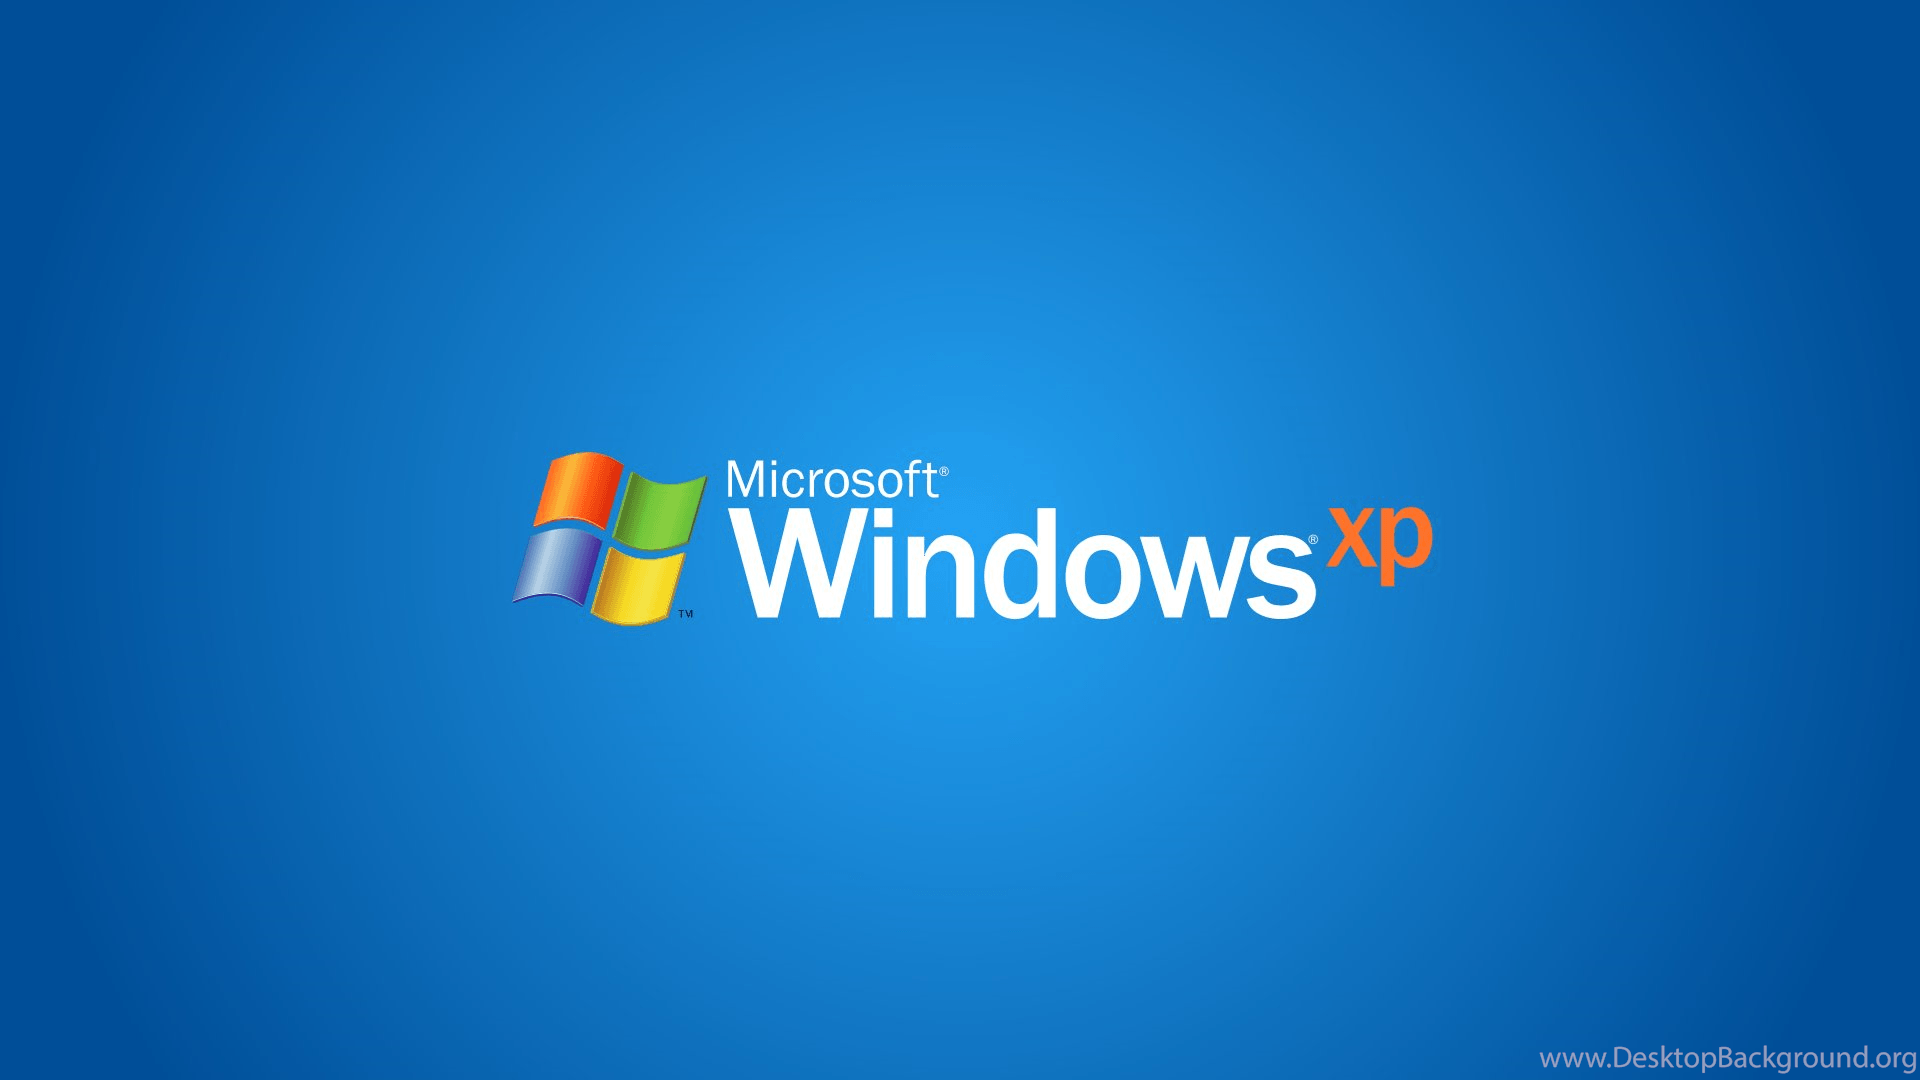 71516 Simple Windows XP Bliss wallpaper, Credit goes to Charles O Rear for original  wallpaper., Microsoft, Windows XP, Windows - Rare Gallery HD Wallpapers